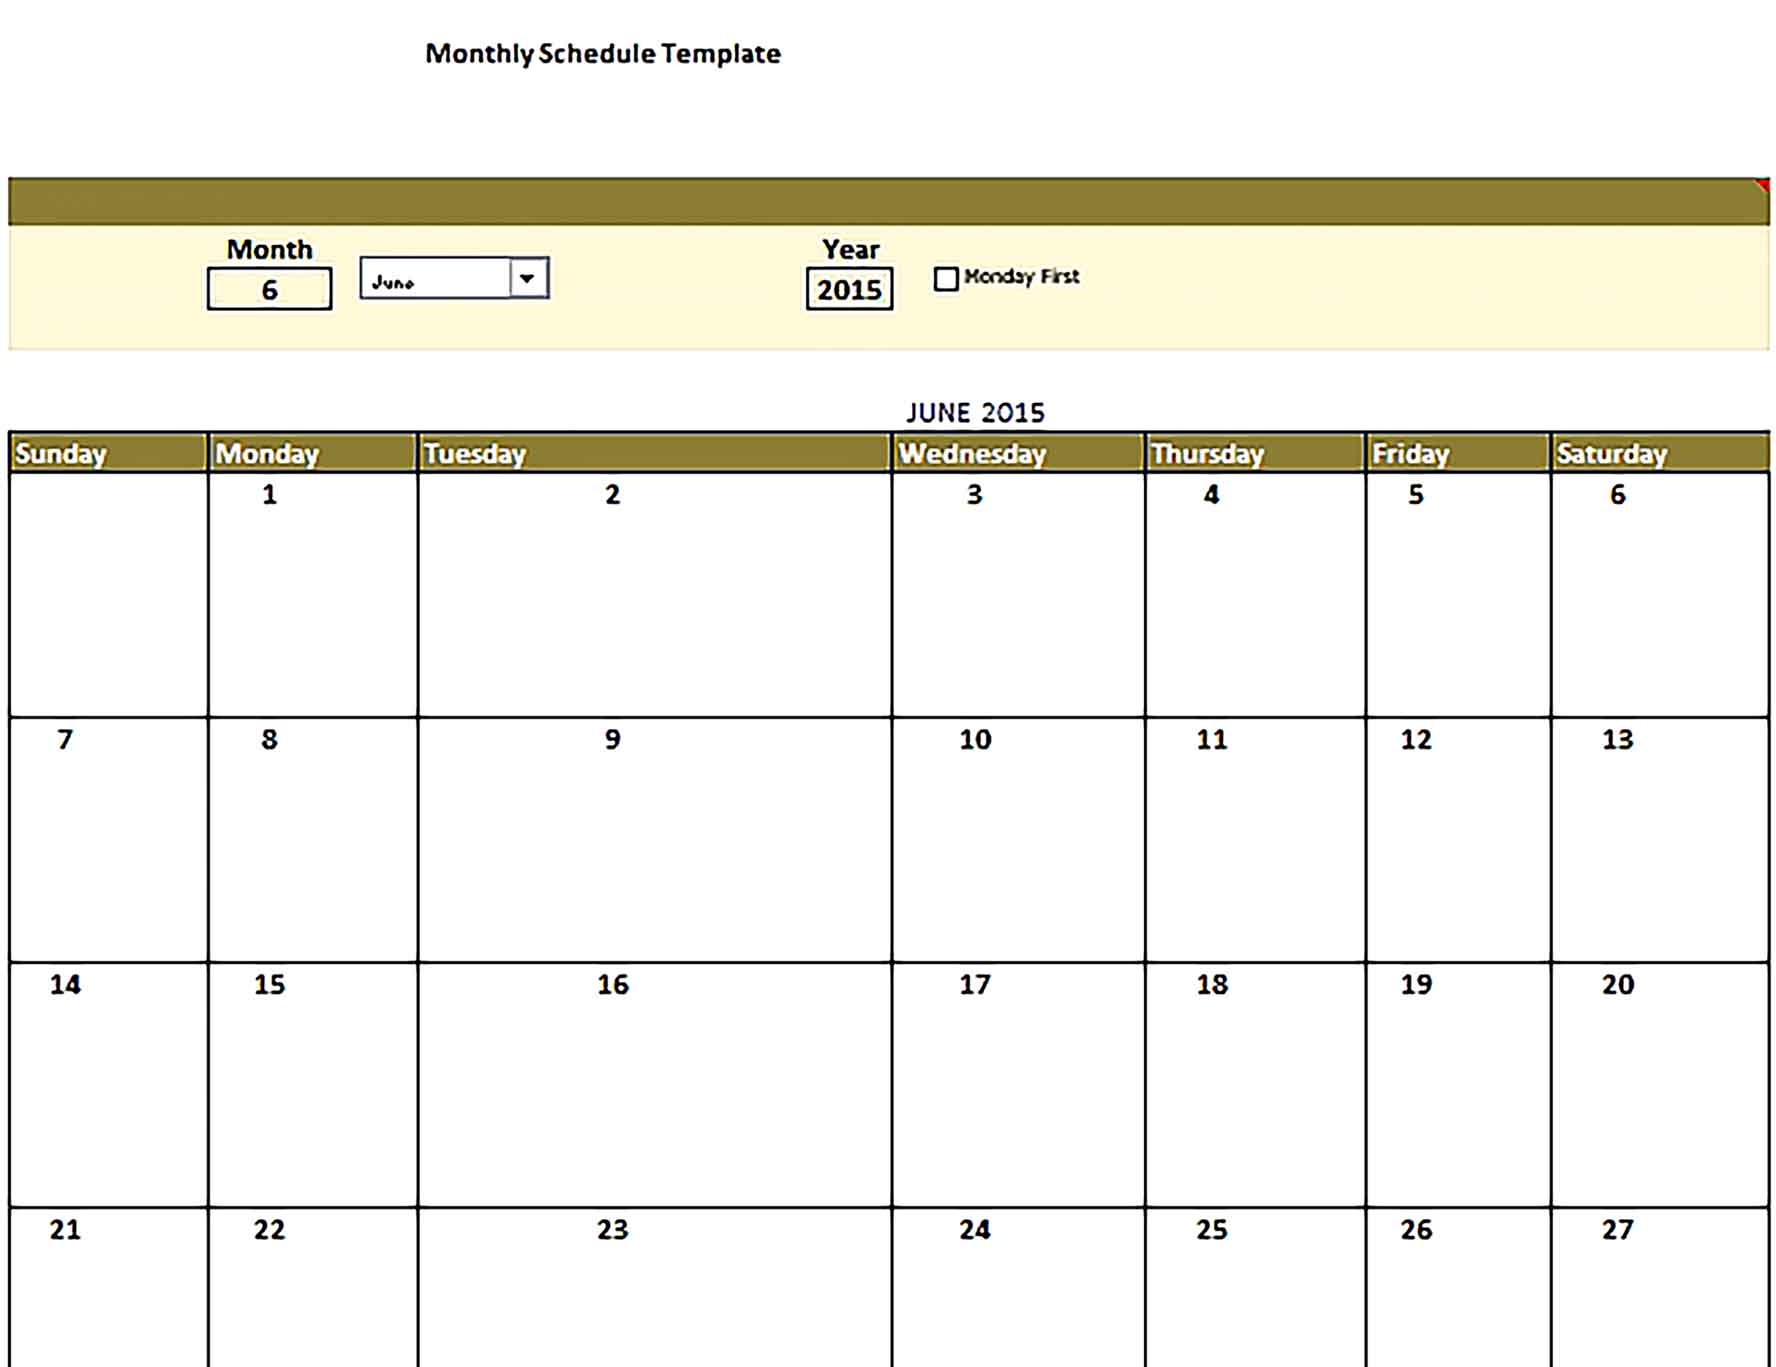 Template monthly schedule Sample